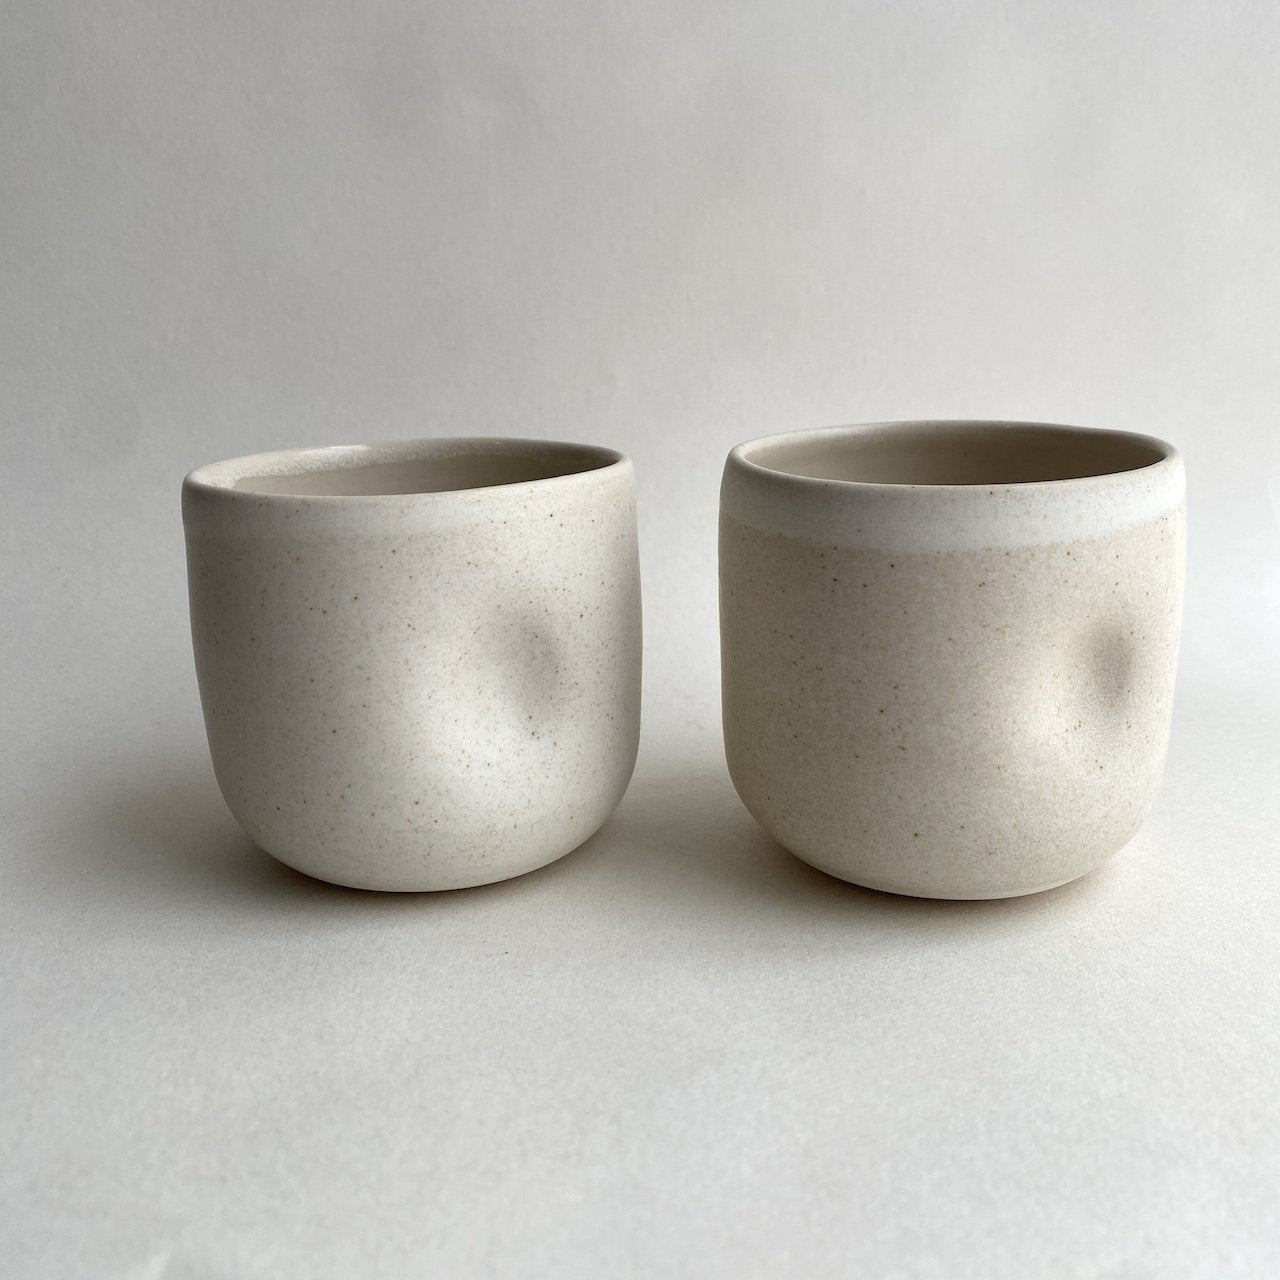 Small Dimple Cup | Oat Glaze | Handmade Ceramic | by Bowbeer Designs - Lifestory